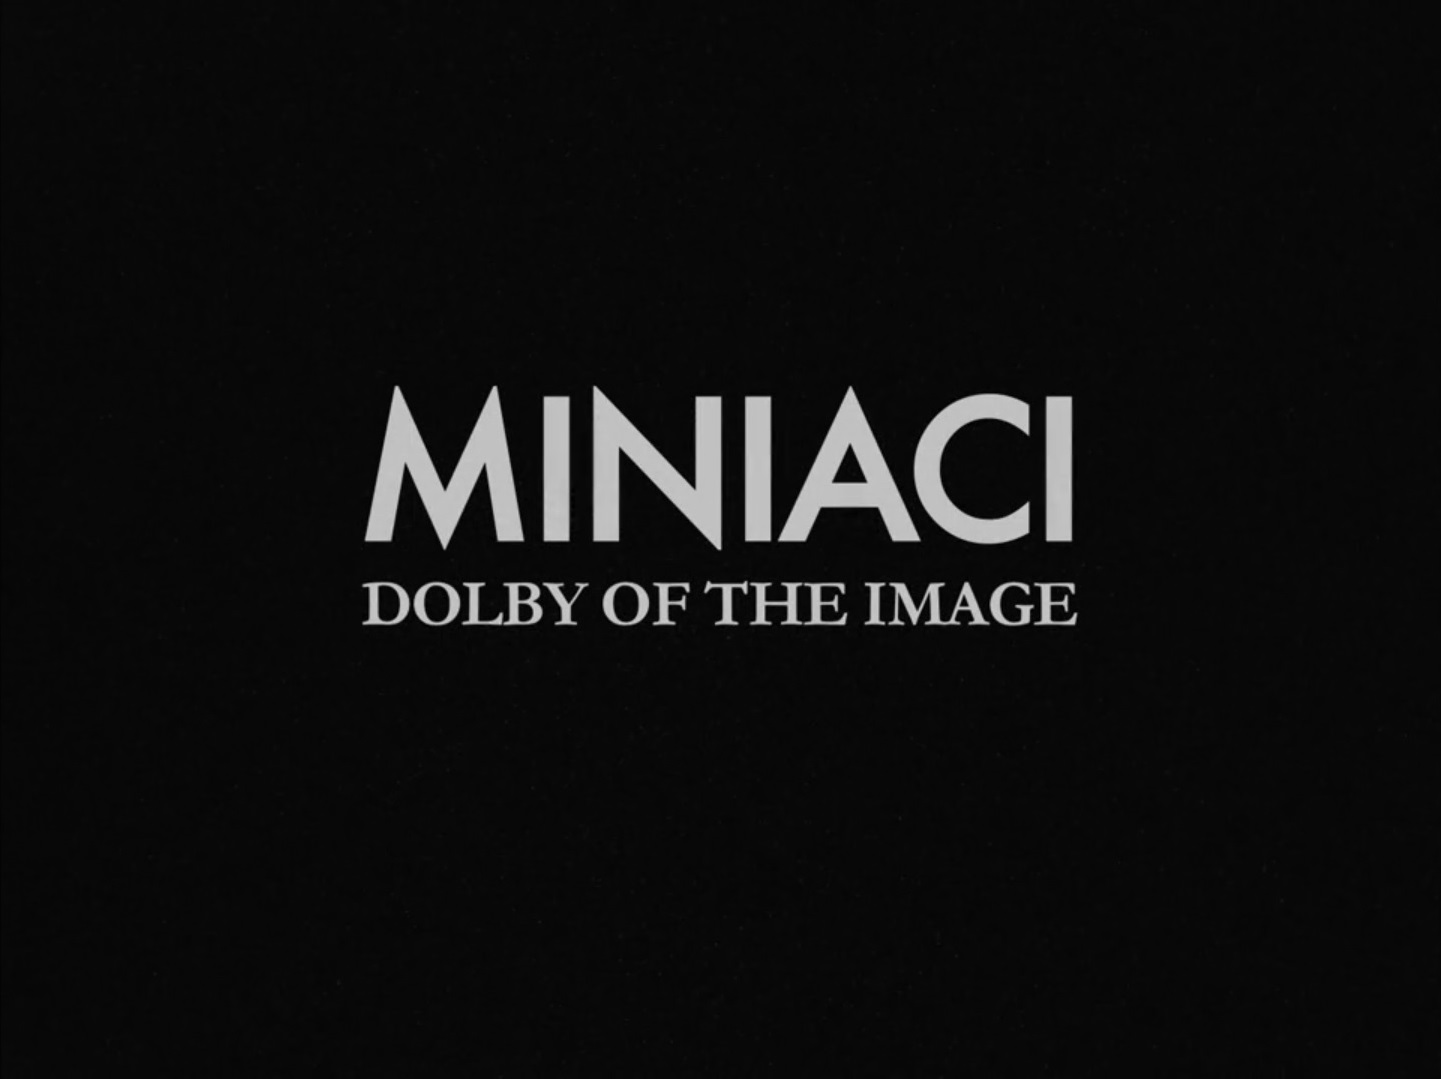 Miniaci Dolby of the Image